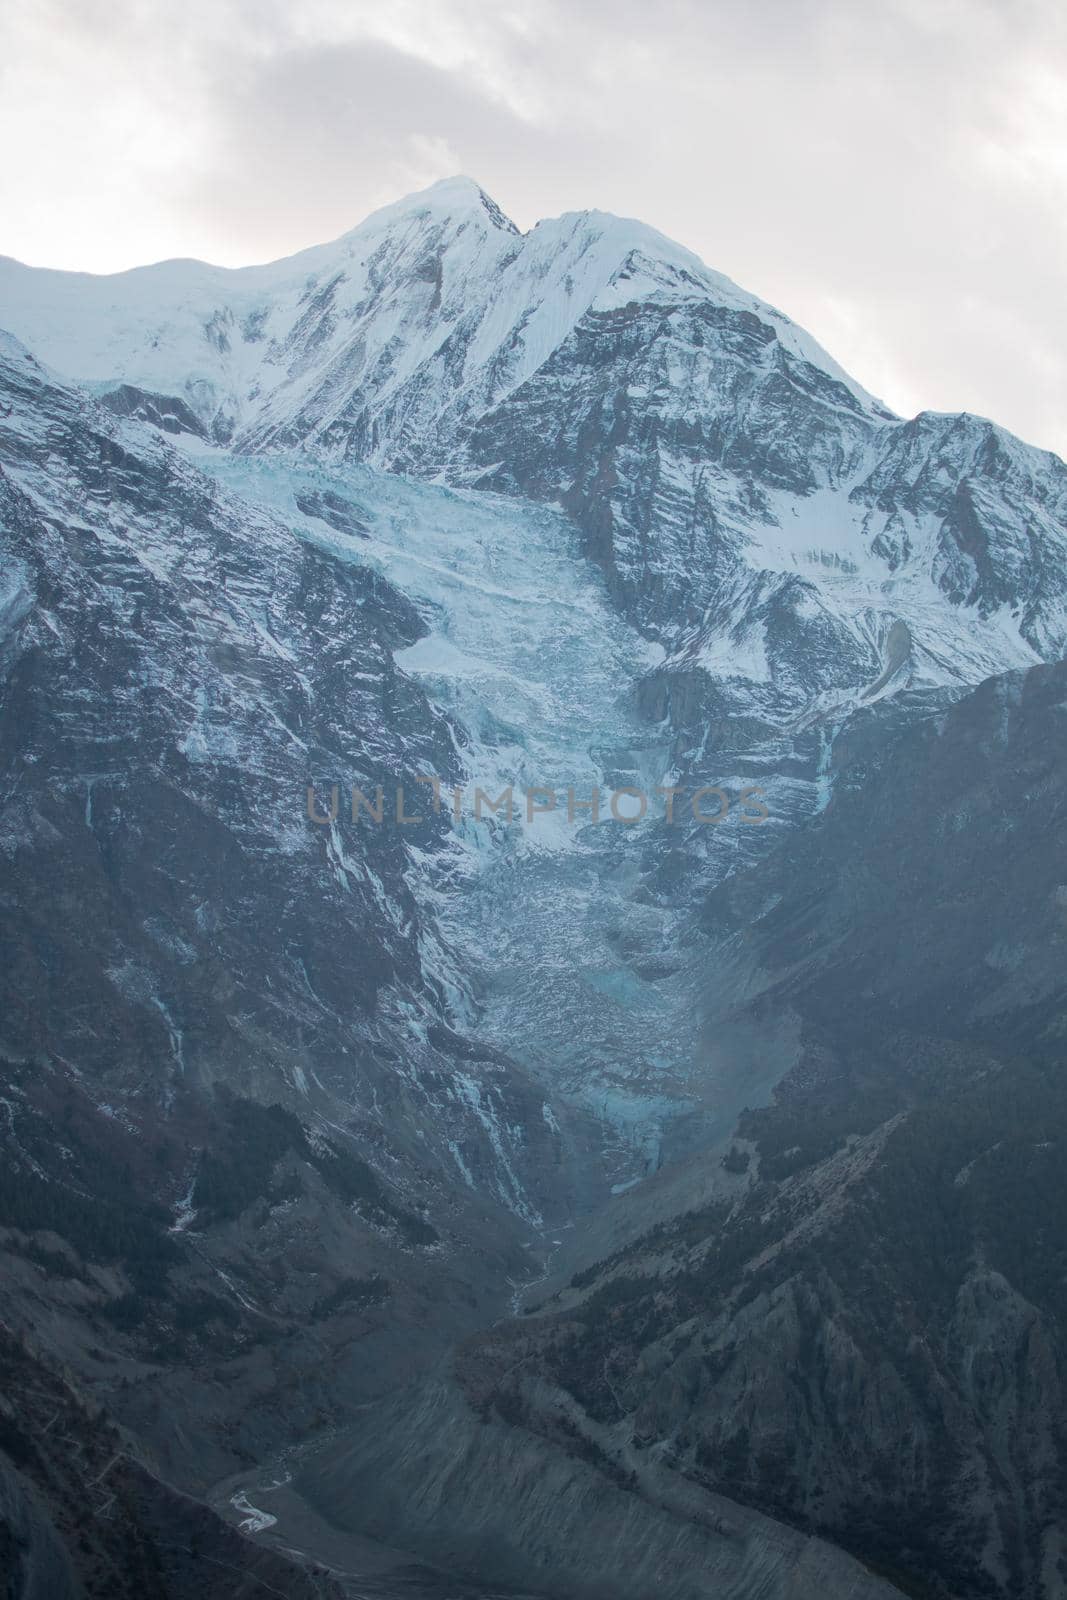 Mountain glacier over Manang village by arvidnorberg